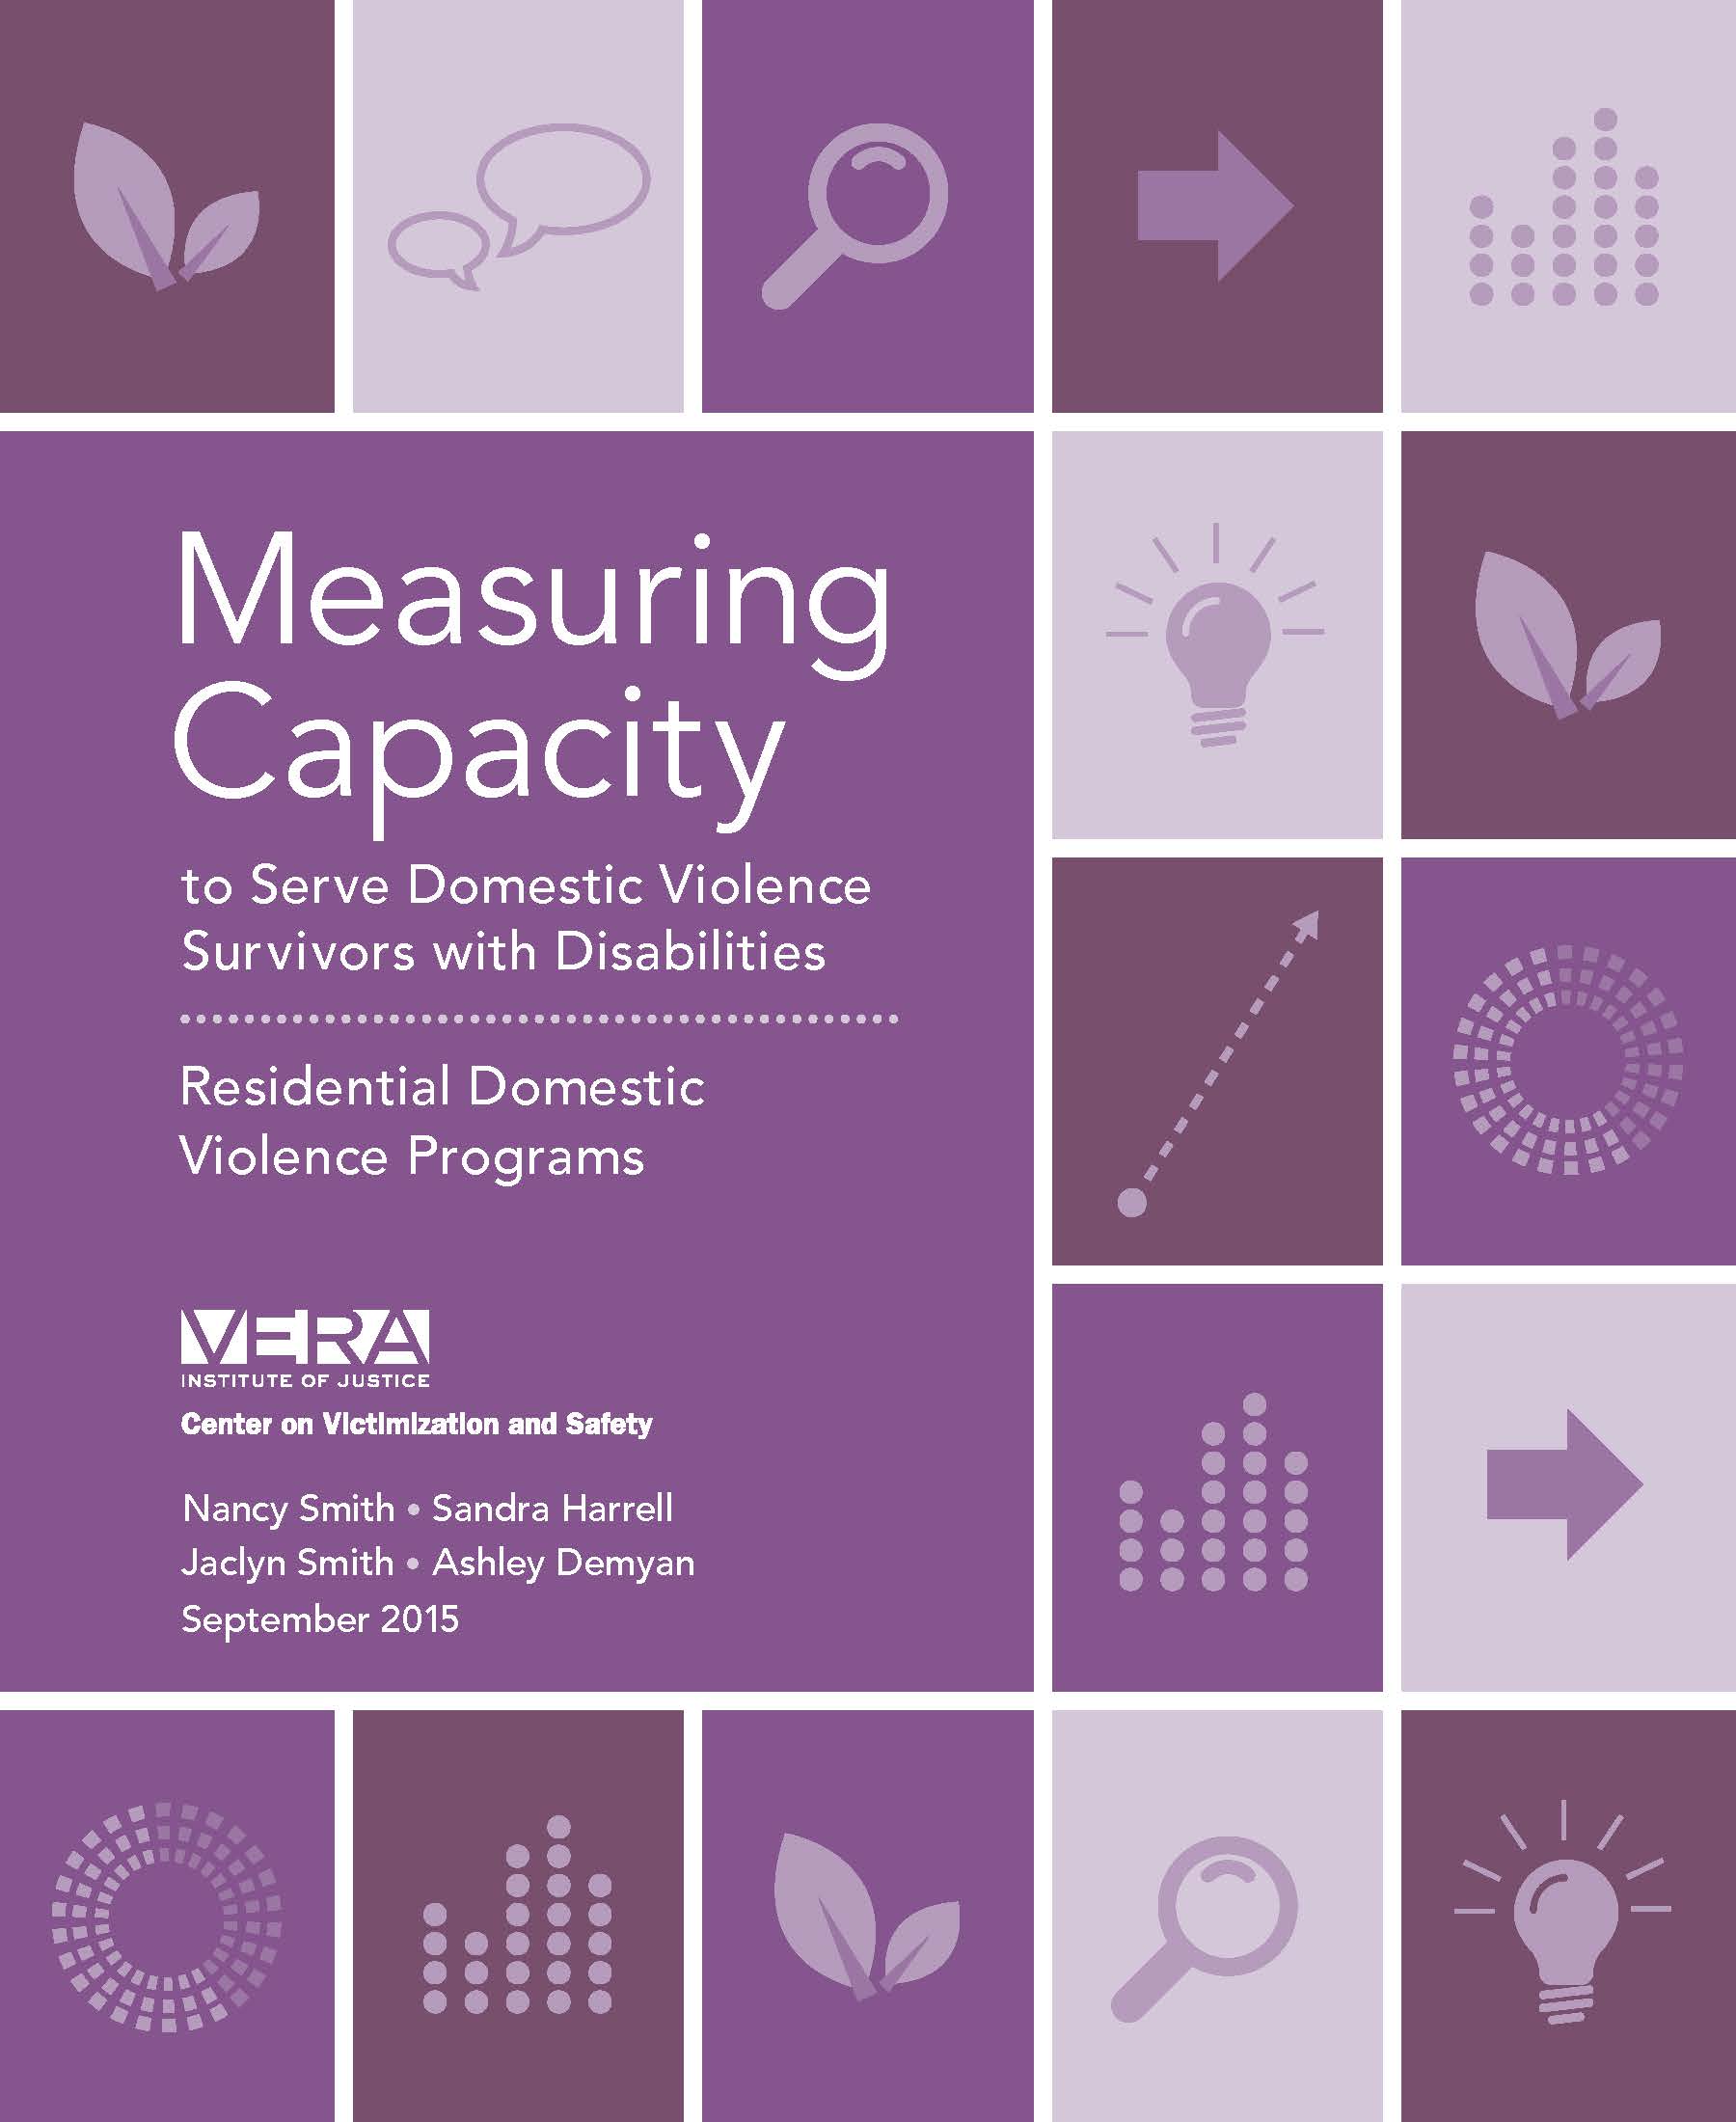 Purple cover with icon grid, with text Measuring Capacity to Serve Domestic Violence Survivors with Disabilities, Residential Domestic Violence Programs.